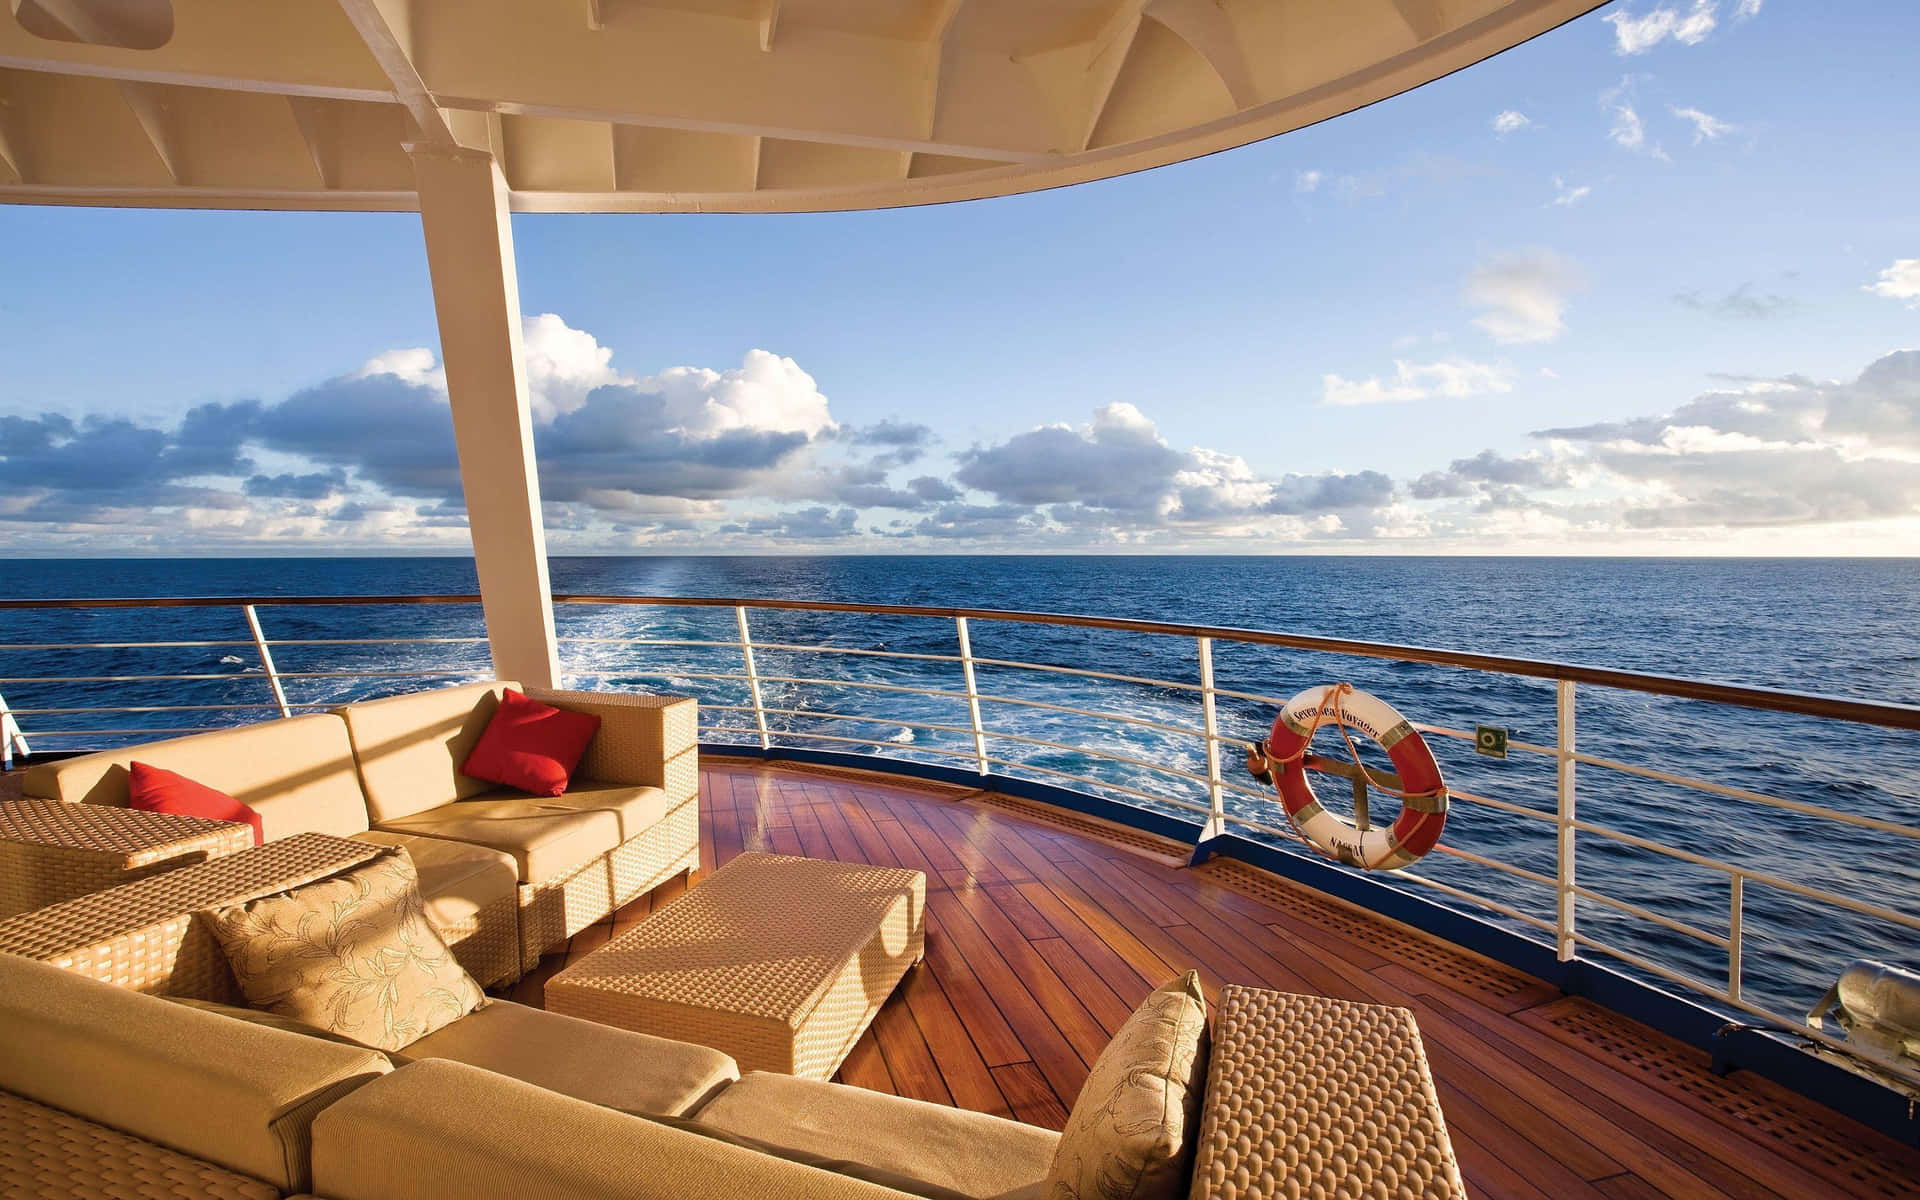 Explore the Open Seas in a Luxurious Yacht